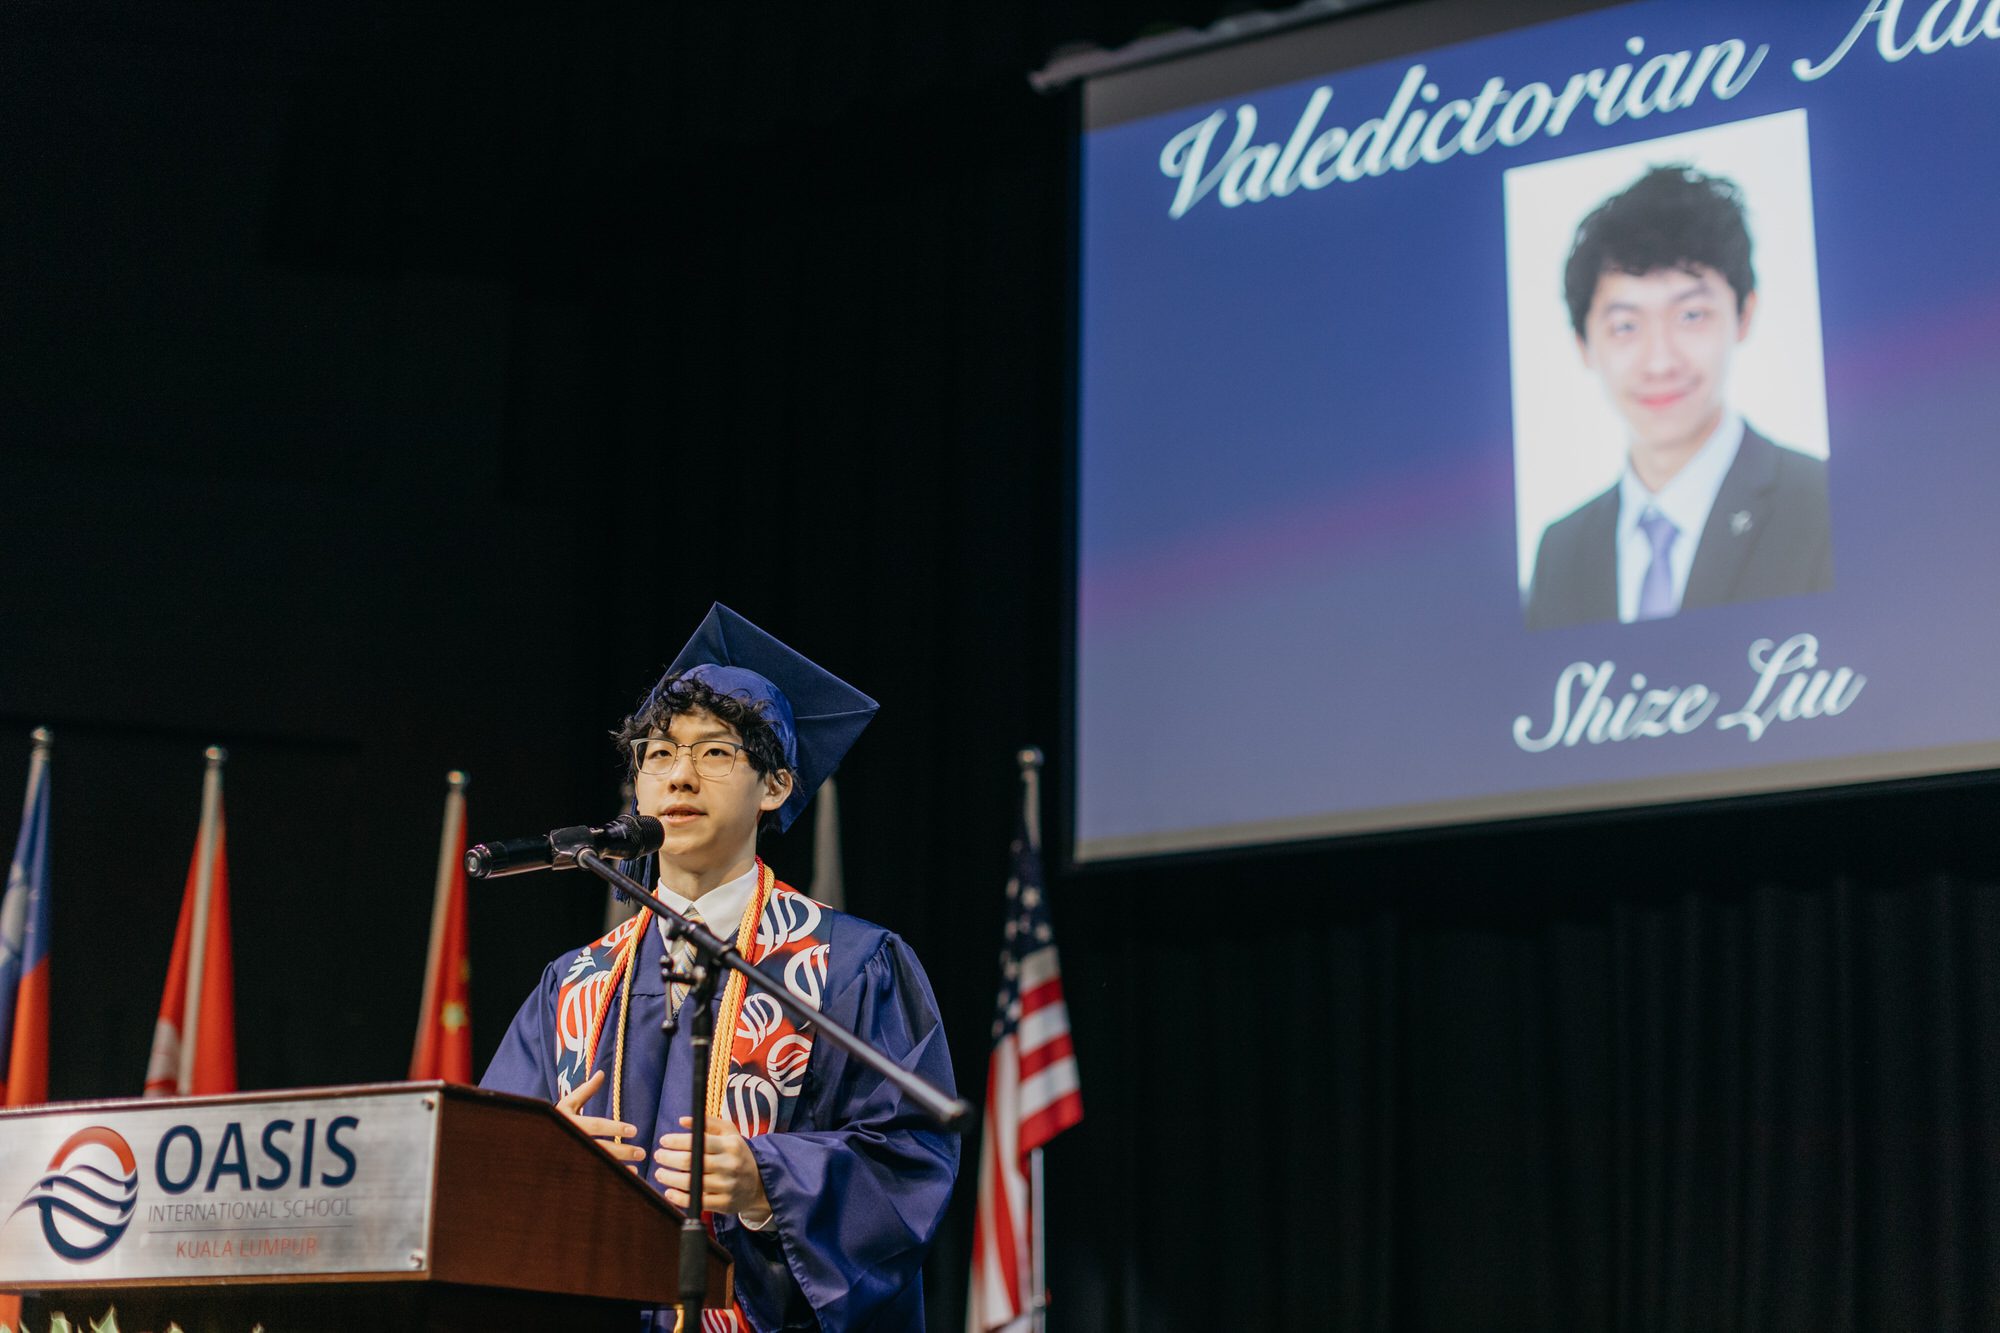 A confident student standing behind a podium, delivering a powerful valedictorian speech during the Oasis International School 2023 graduation ceremony.